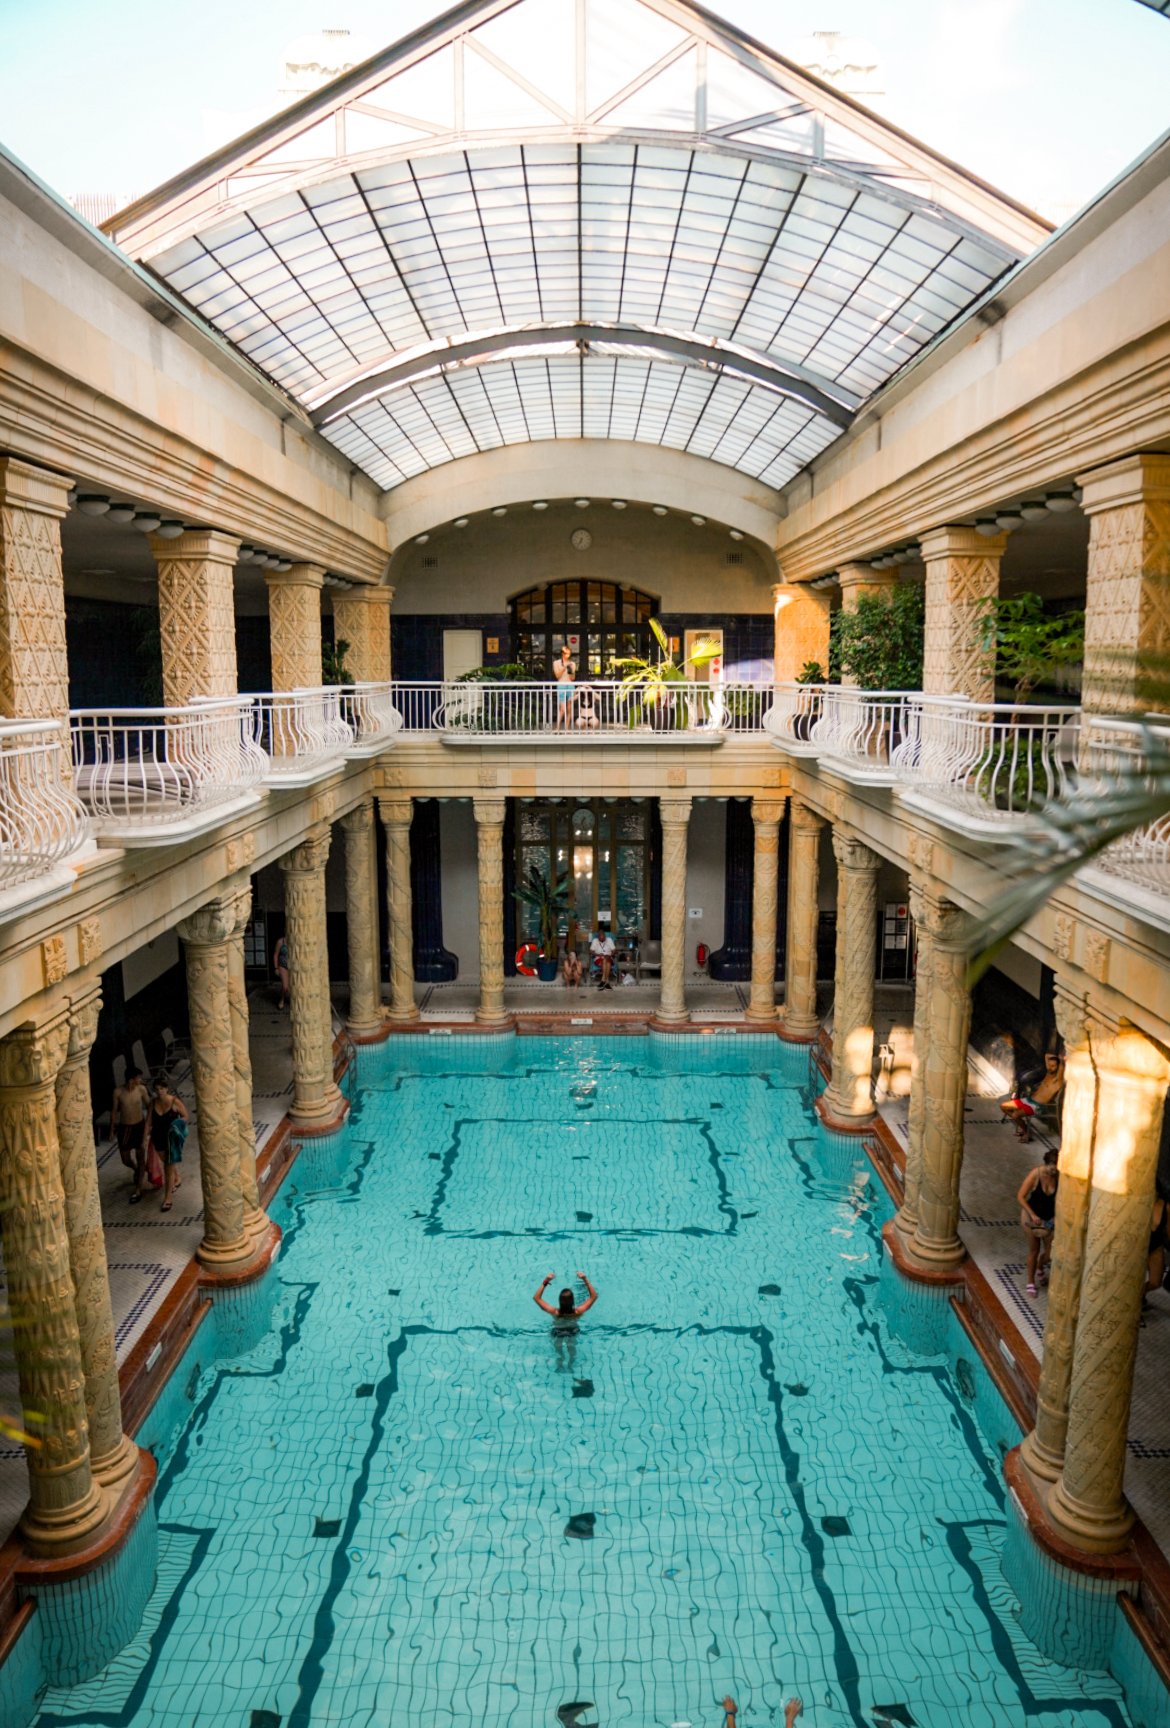 Gellert Spa, 10 top things to do in Budapest